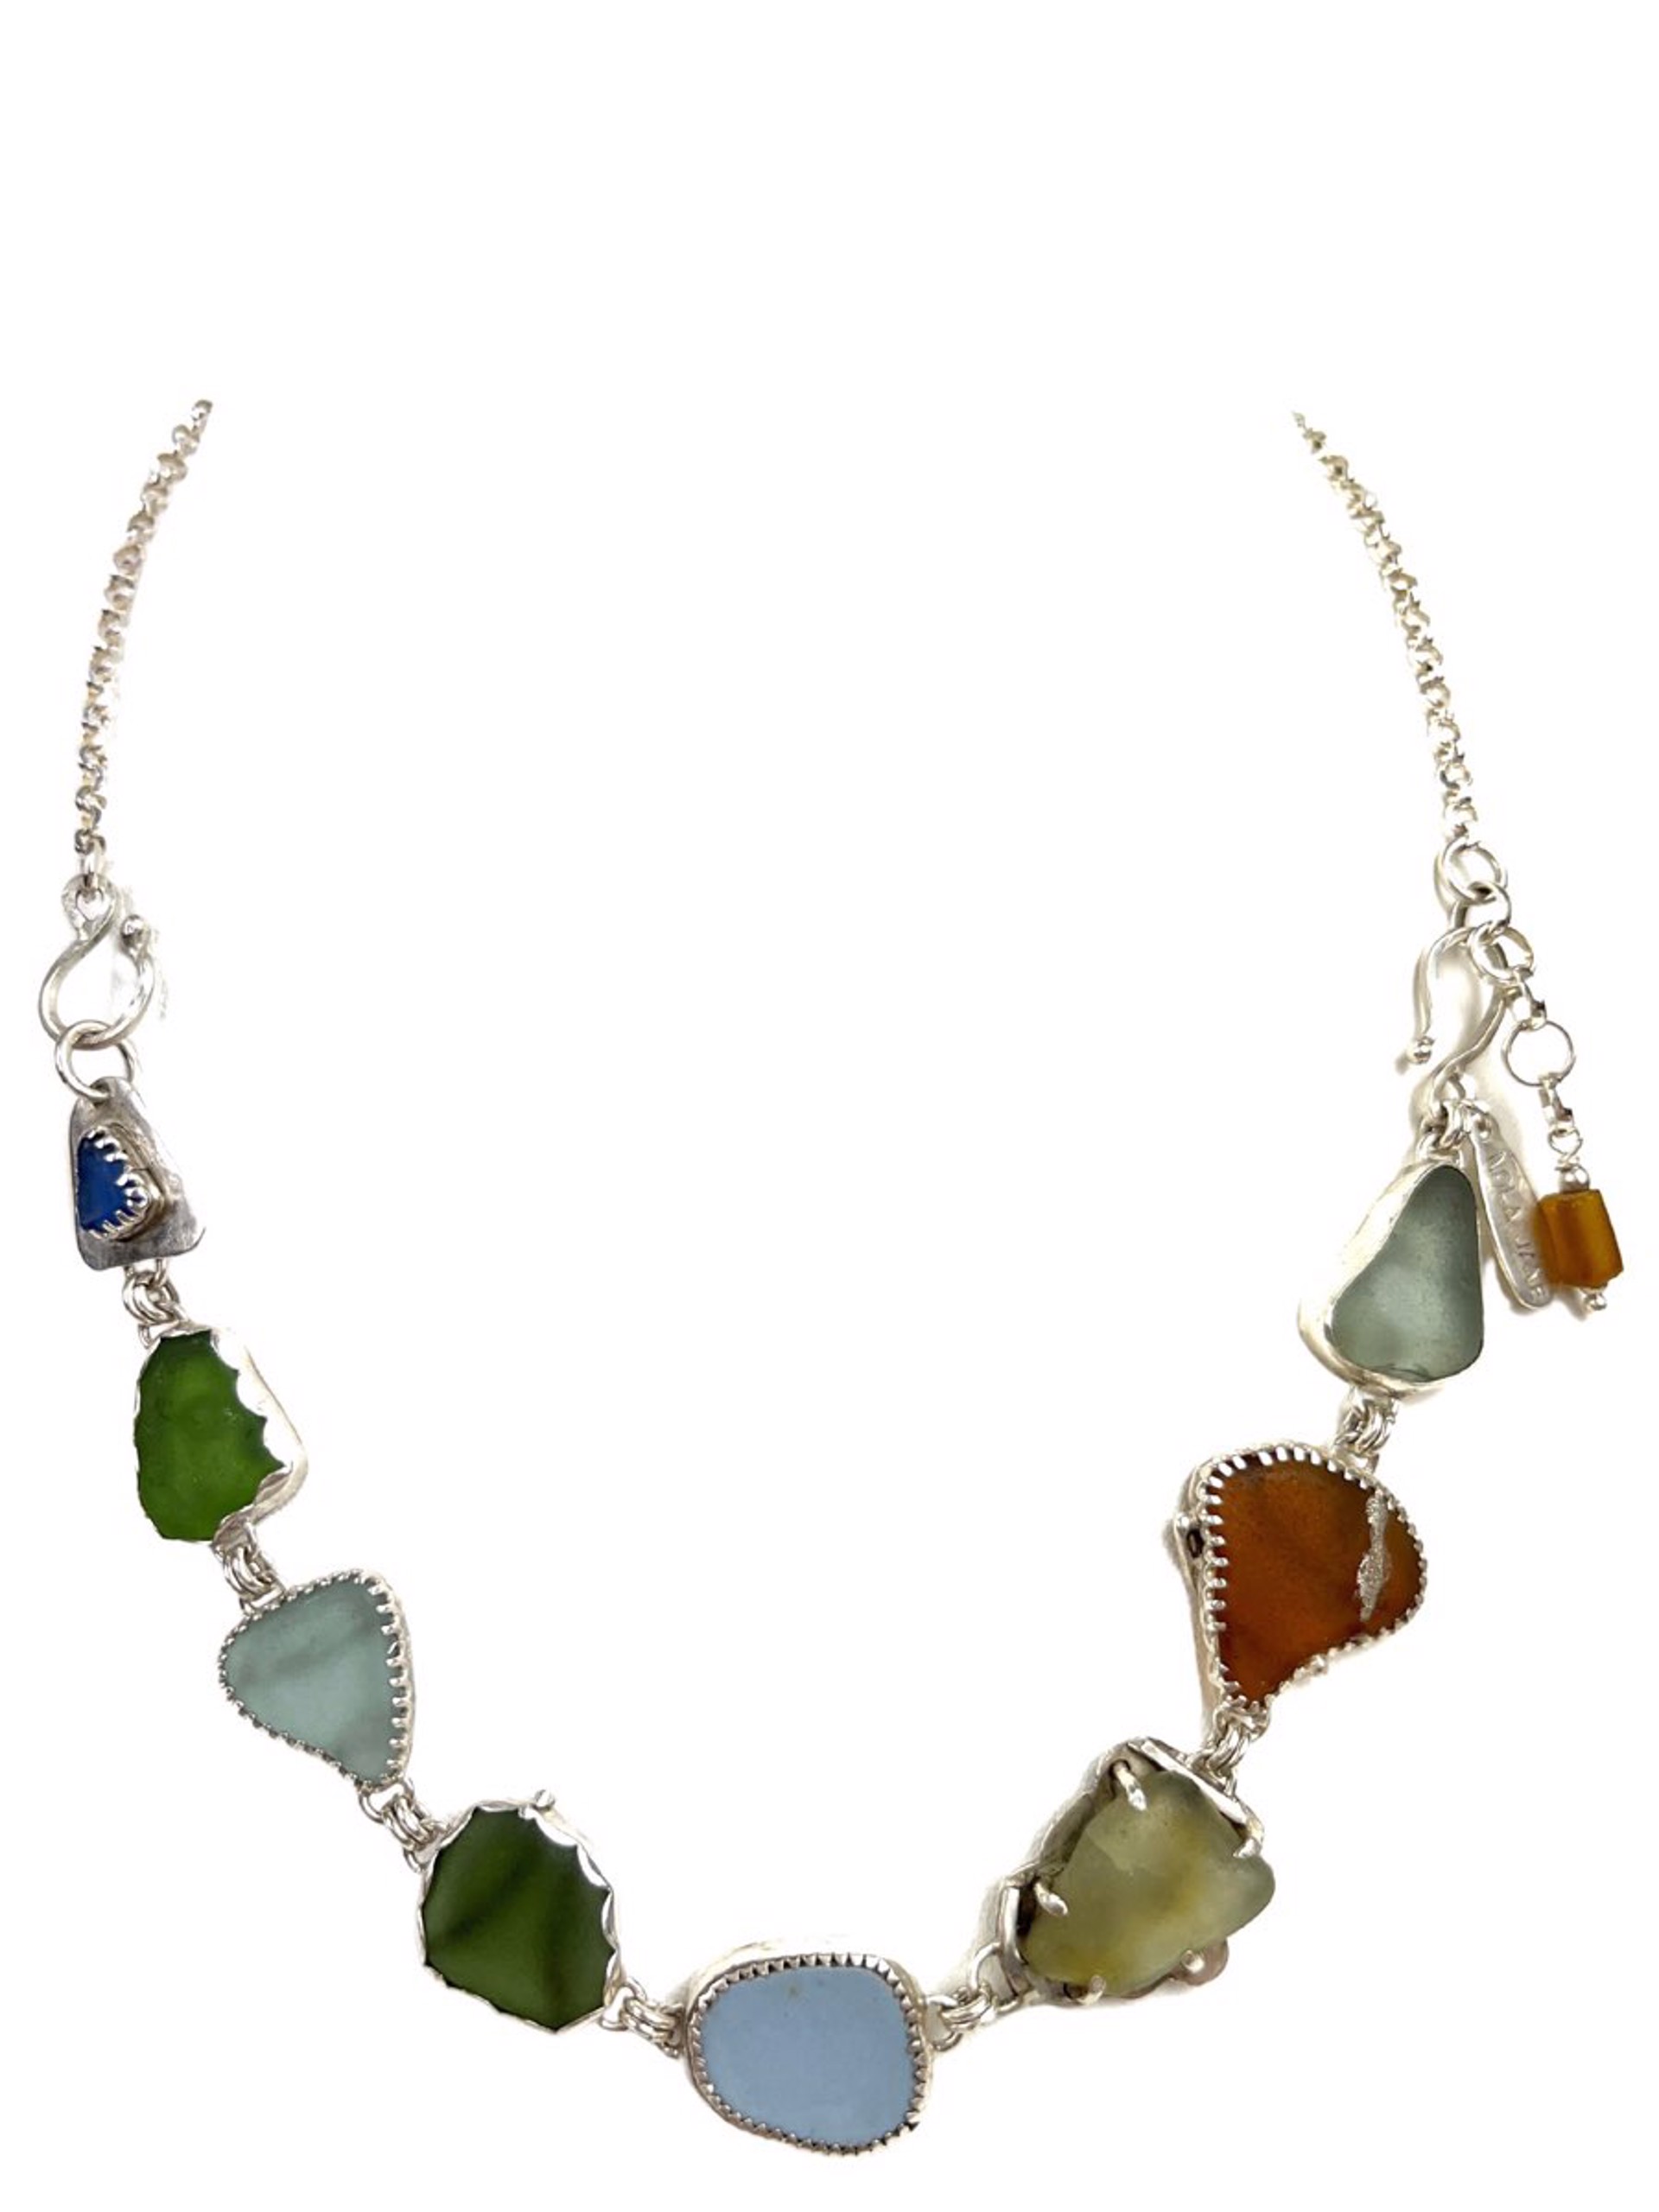 Beach Glass and Sterling Silver Convertible Necklace by Nola Smodic